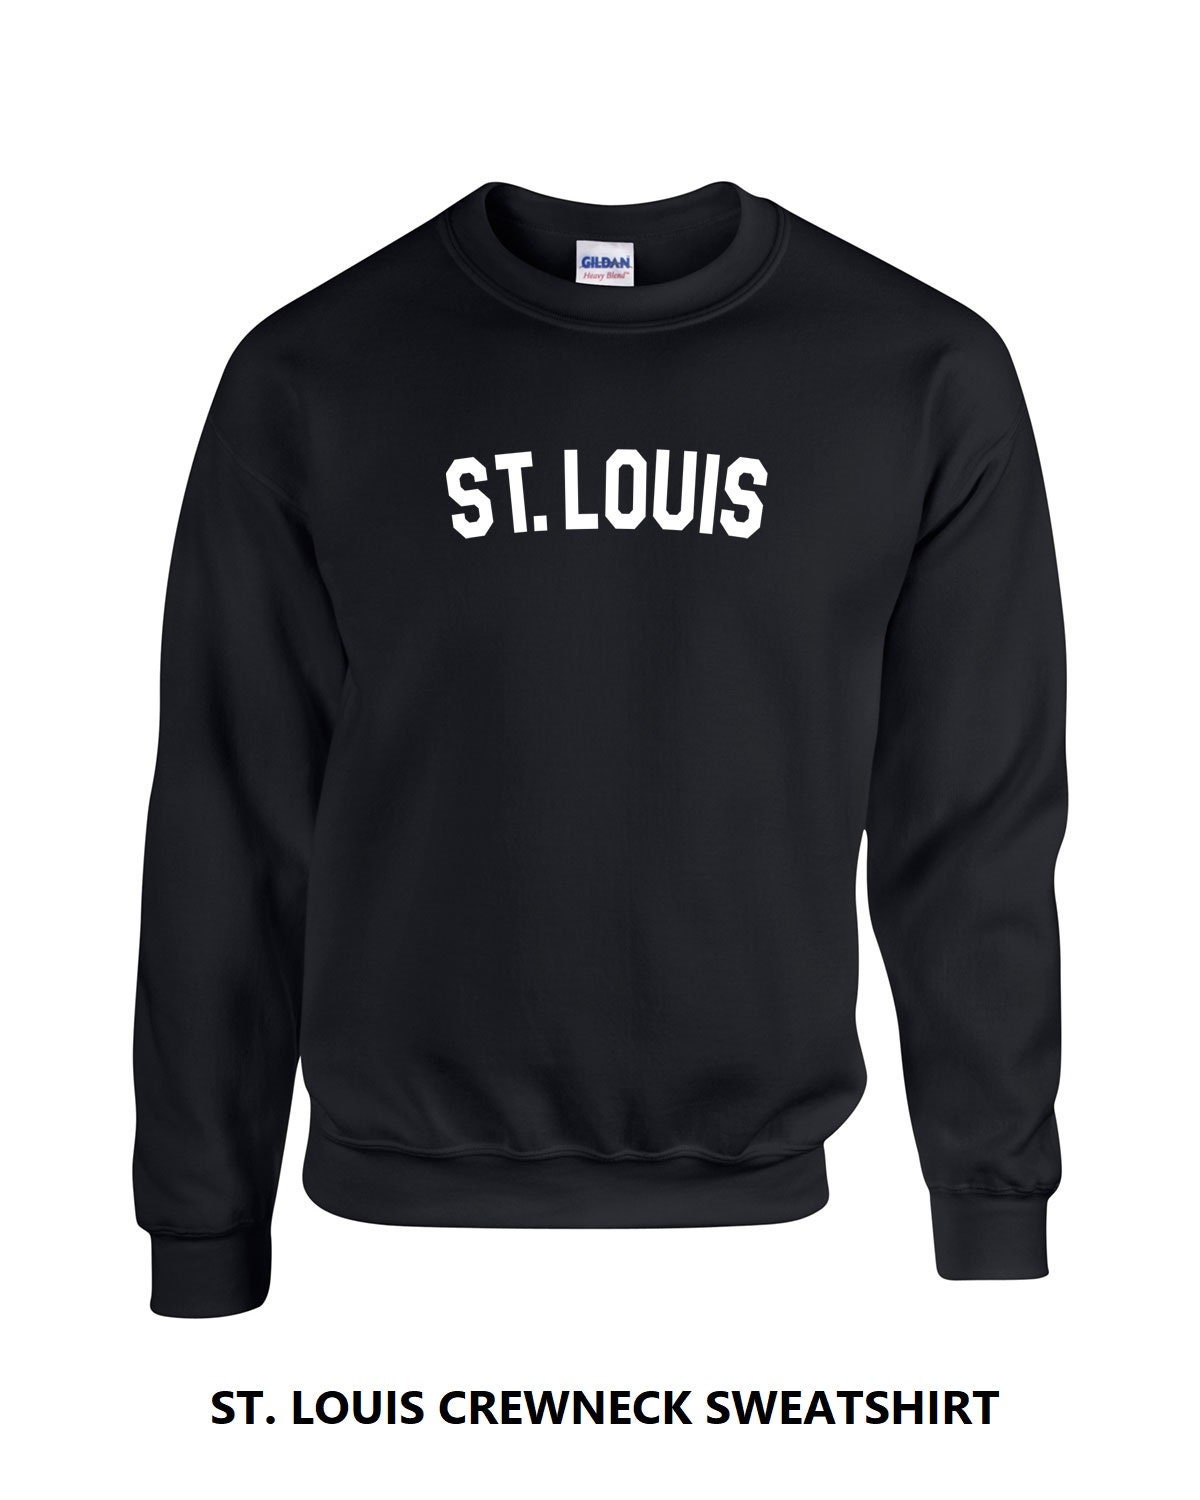 St. Louis Cardinals MLB Custom Number And Name 3D Hoodie For Men And Women  Gift Fans - Banantees